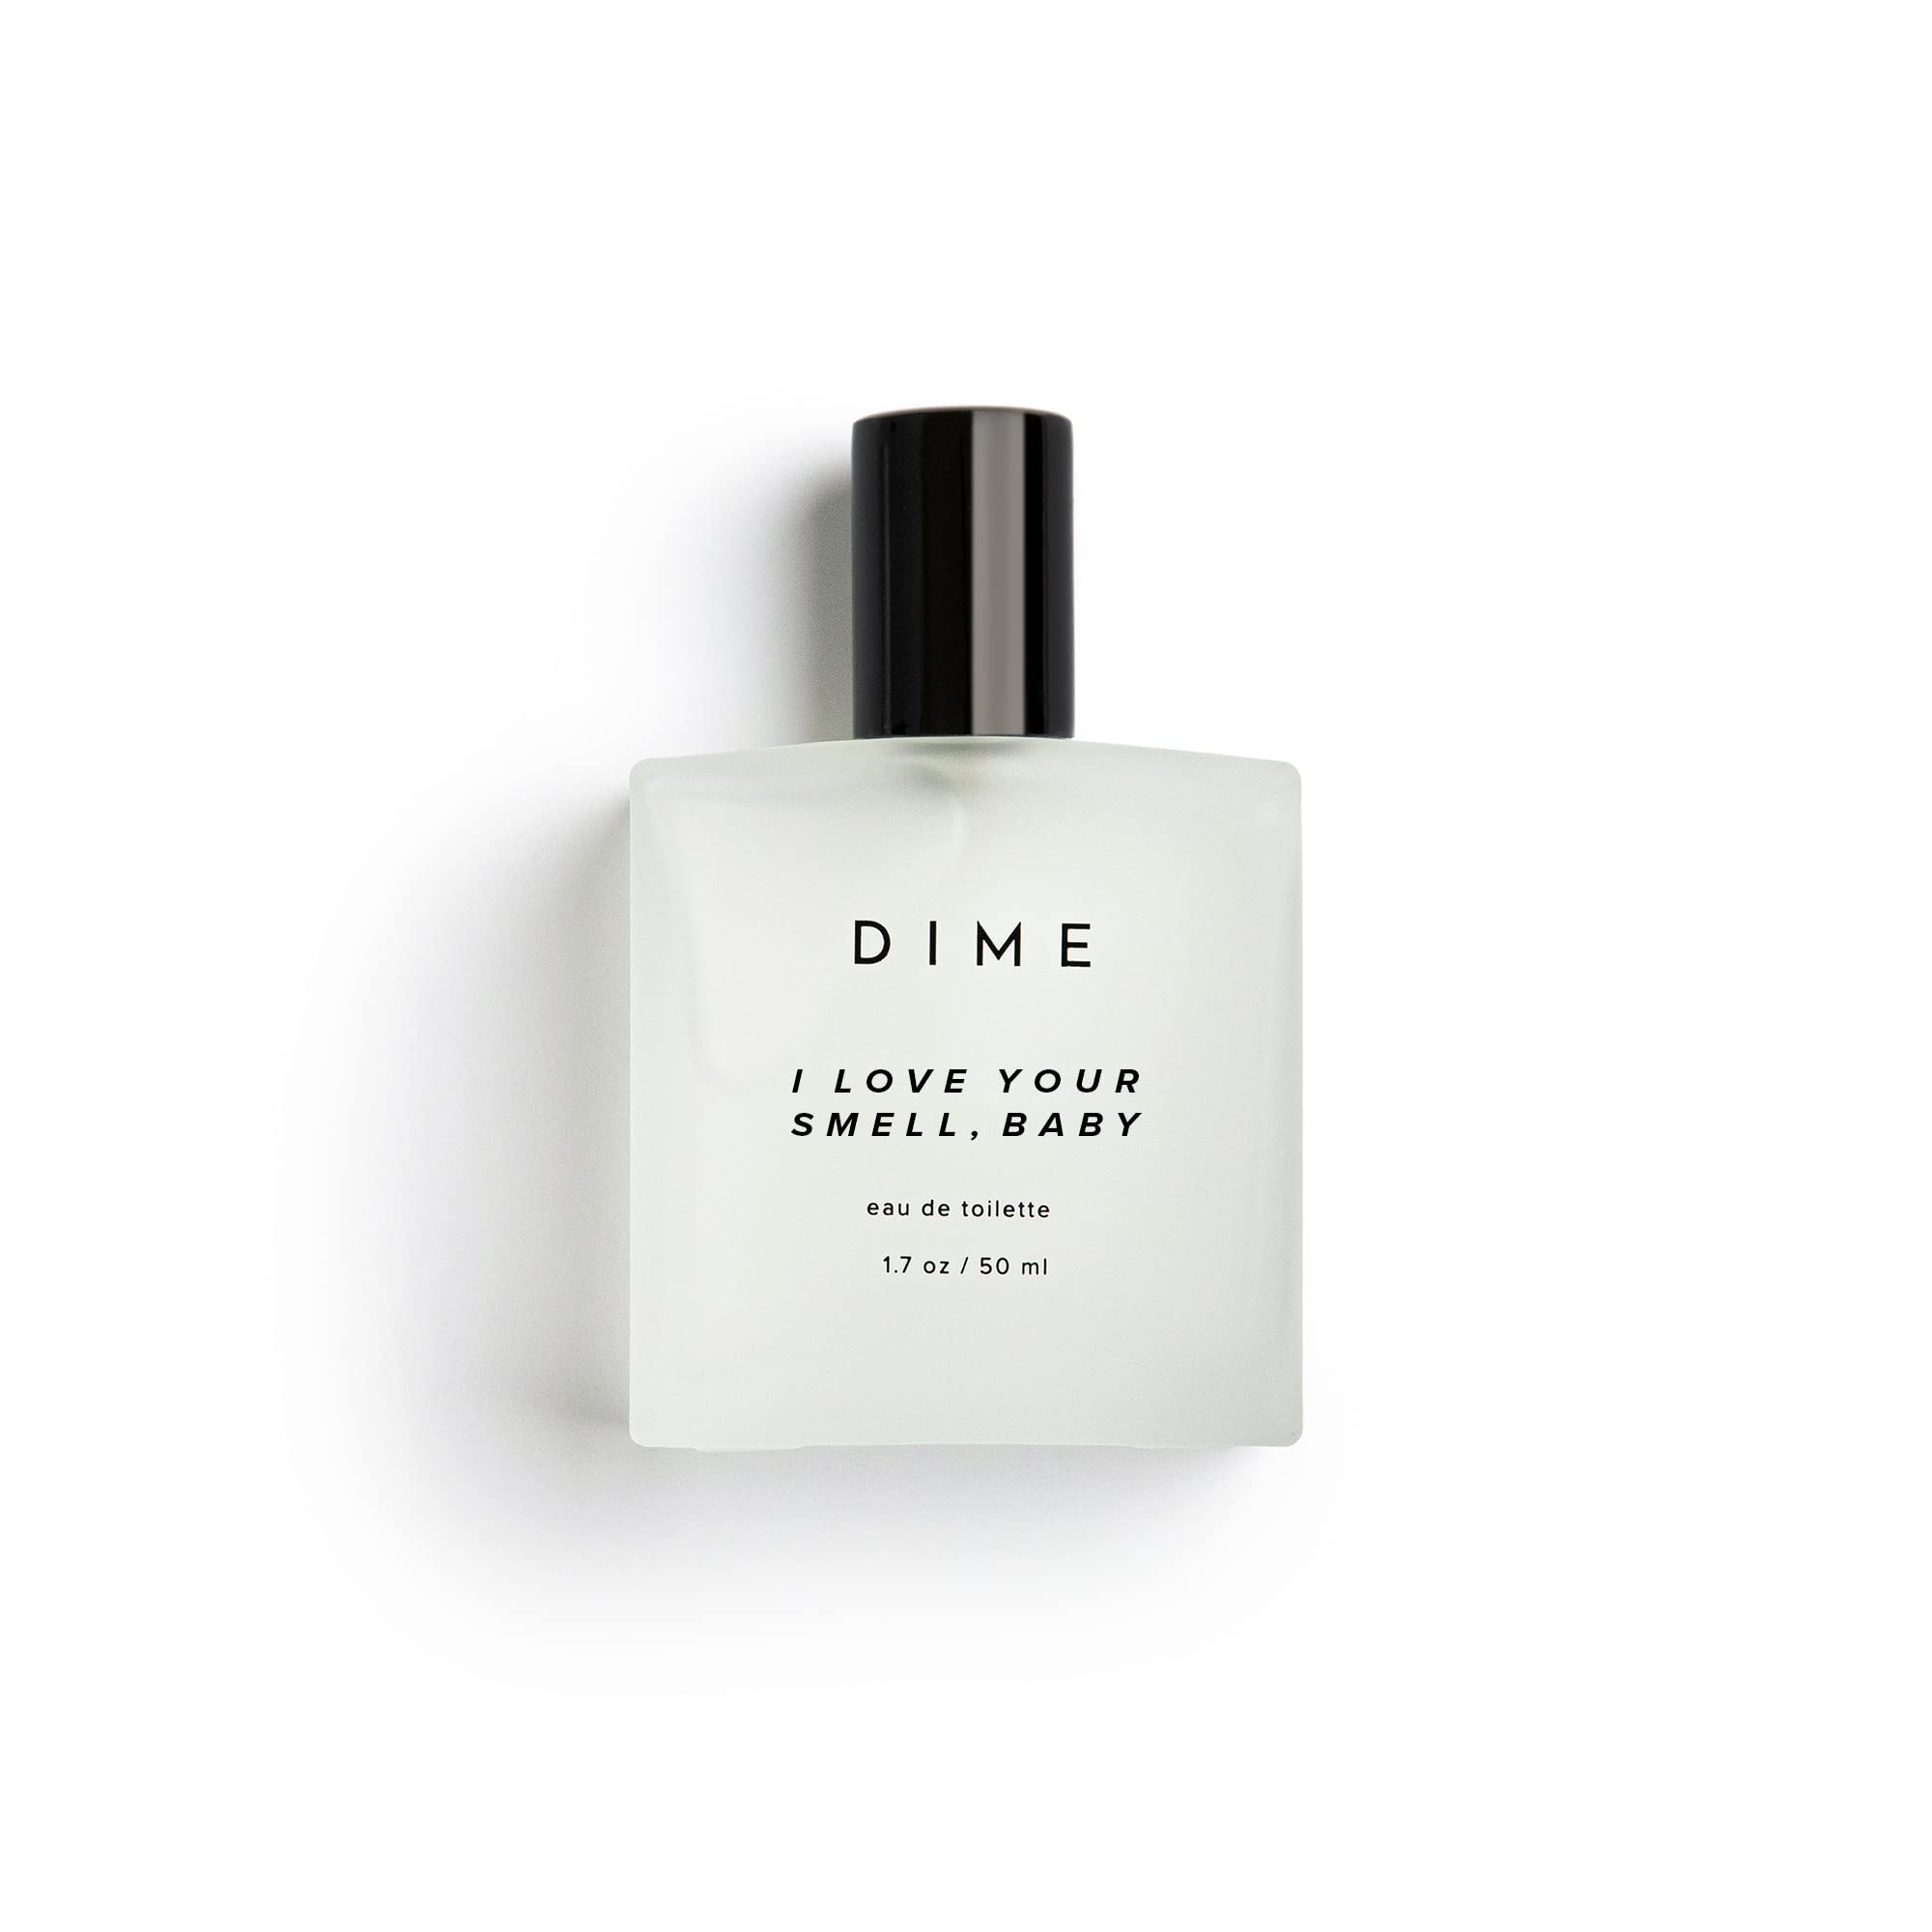 DIME Beauty Perfume I Love Your Smell, Baby, Sweet Floral Scent, Hypoallergenic, Clean Perfume, Eau de Toilette For Women, 1.7 oz / 50 ml